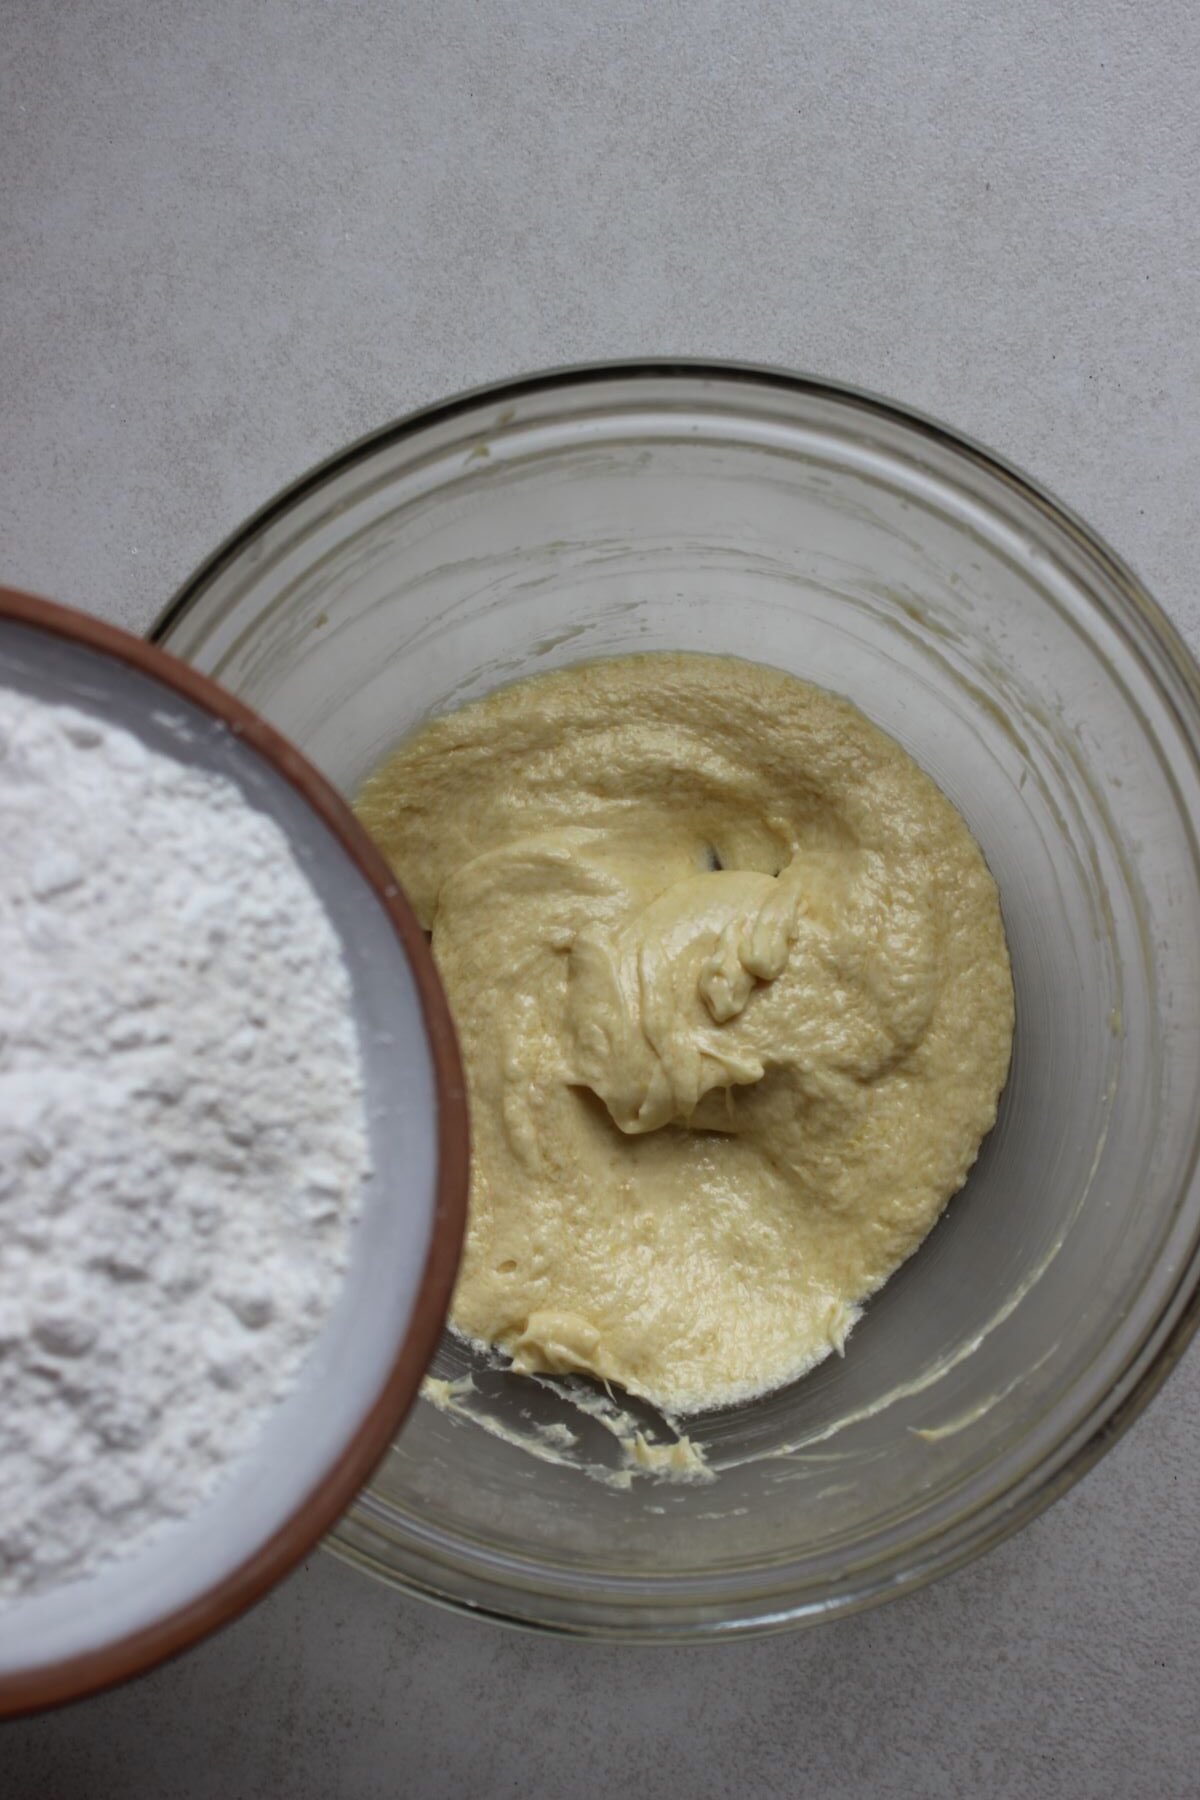 A plate with flour is about to be poured into a glass bowl with a mixture.